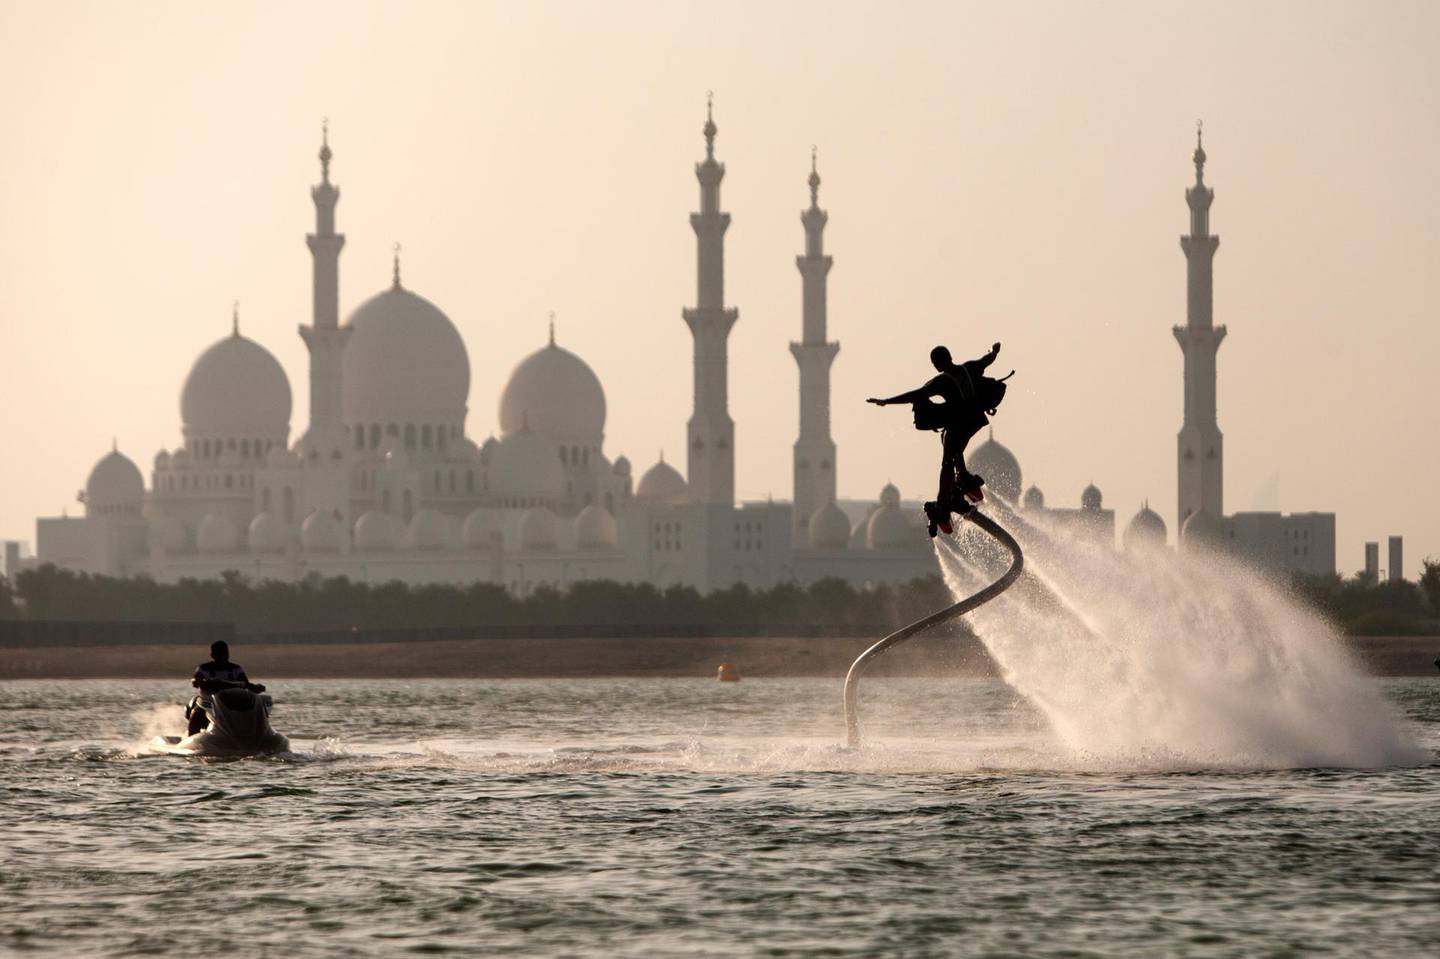 Abu Dhabi, United Arab Emirates, September 1, 2014:     A man flyboards in the Al Maqta Channel in front of the Sheikh Zayed Grand Mosque in Abu Dhabi on September 1, 2014. A Flyboard is a type of water jet-pack attached to a personal water craft which supplies propulsion to drive the device through air and water. Christopher Pike / The NationalReporter:  N/ASection: NewsPossible focal point